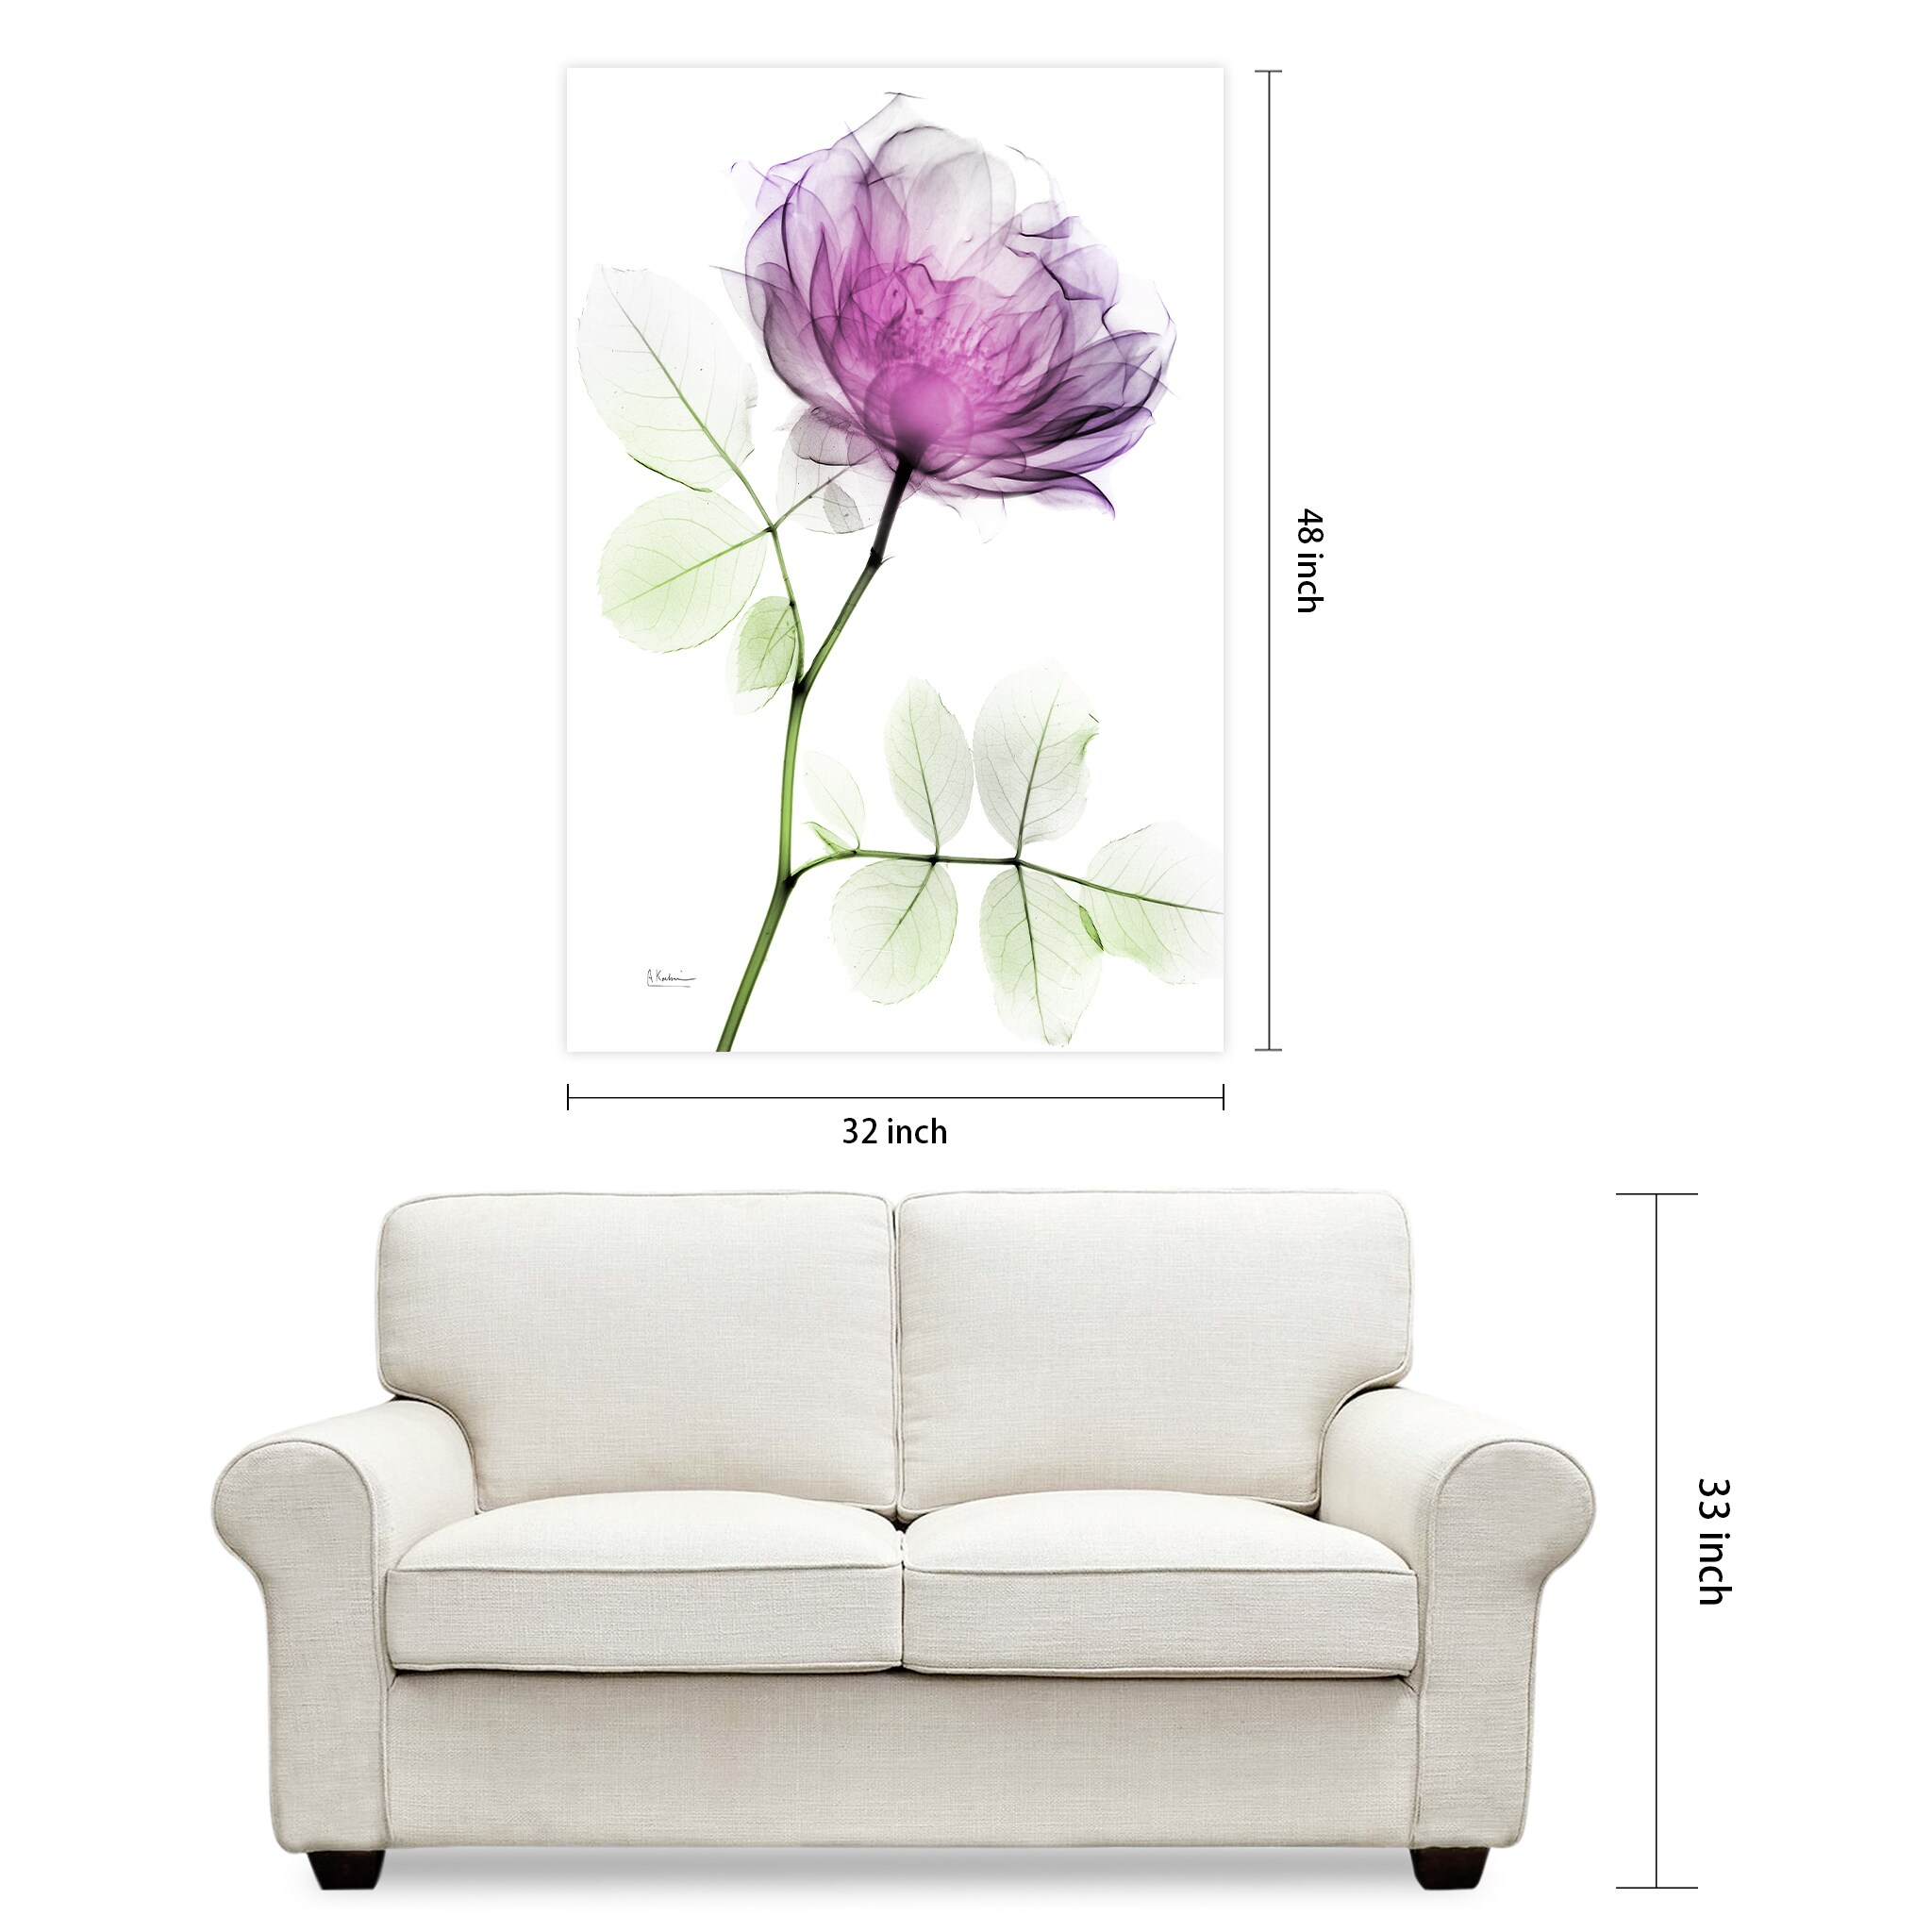 Empire Art Direct 48-in H x 32-in W Floral Glass Print in the Wall 